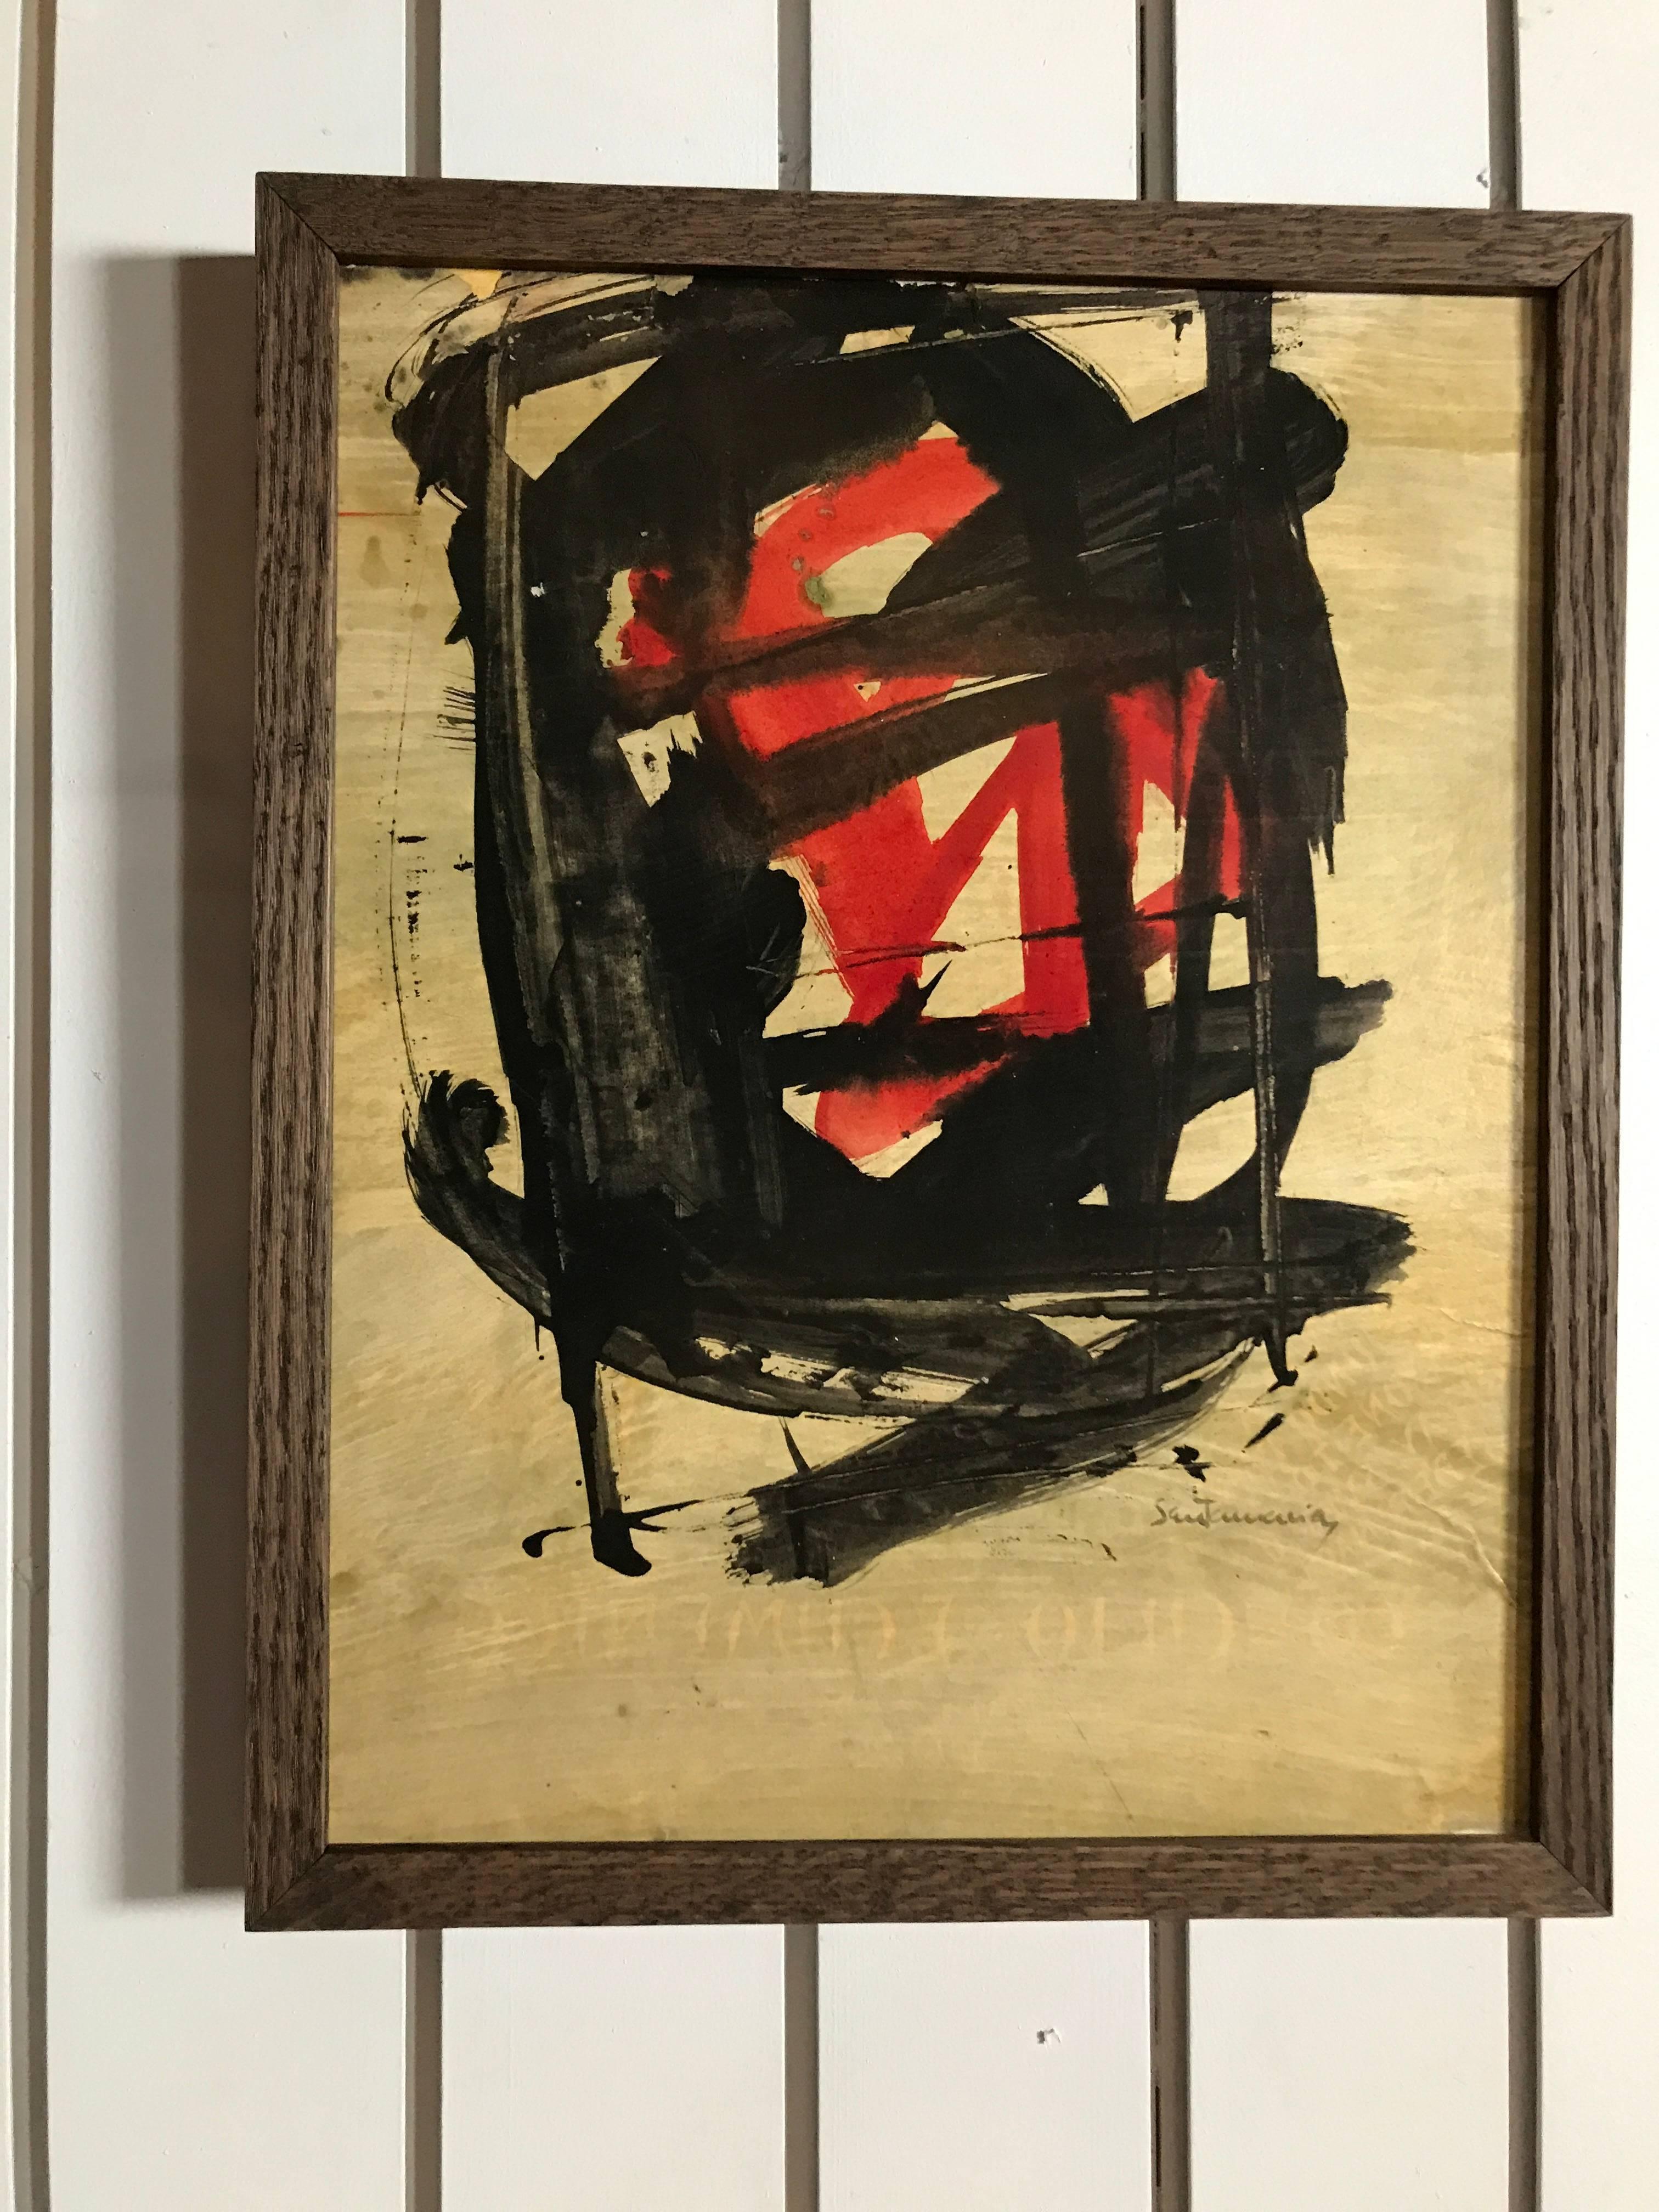 Newly framed painting on board by Spanish artist Santamaria. Black and red stokes on a beige background. Painting appears to be on top of a poster board of some sort, as the reverse image of printed words can be seen lightly through the beige wash.